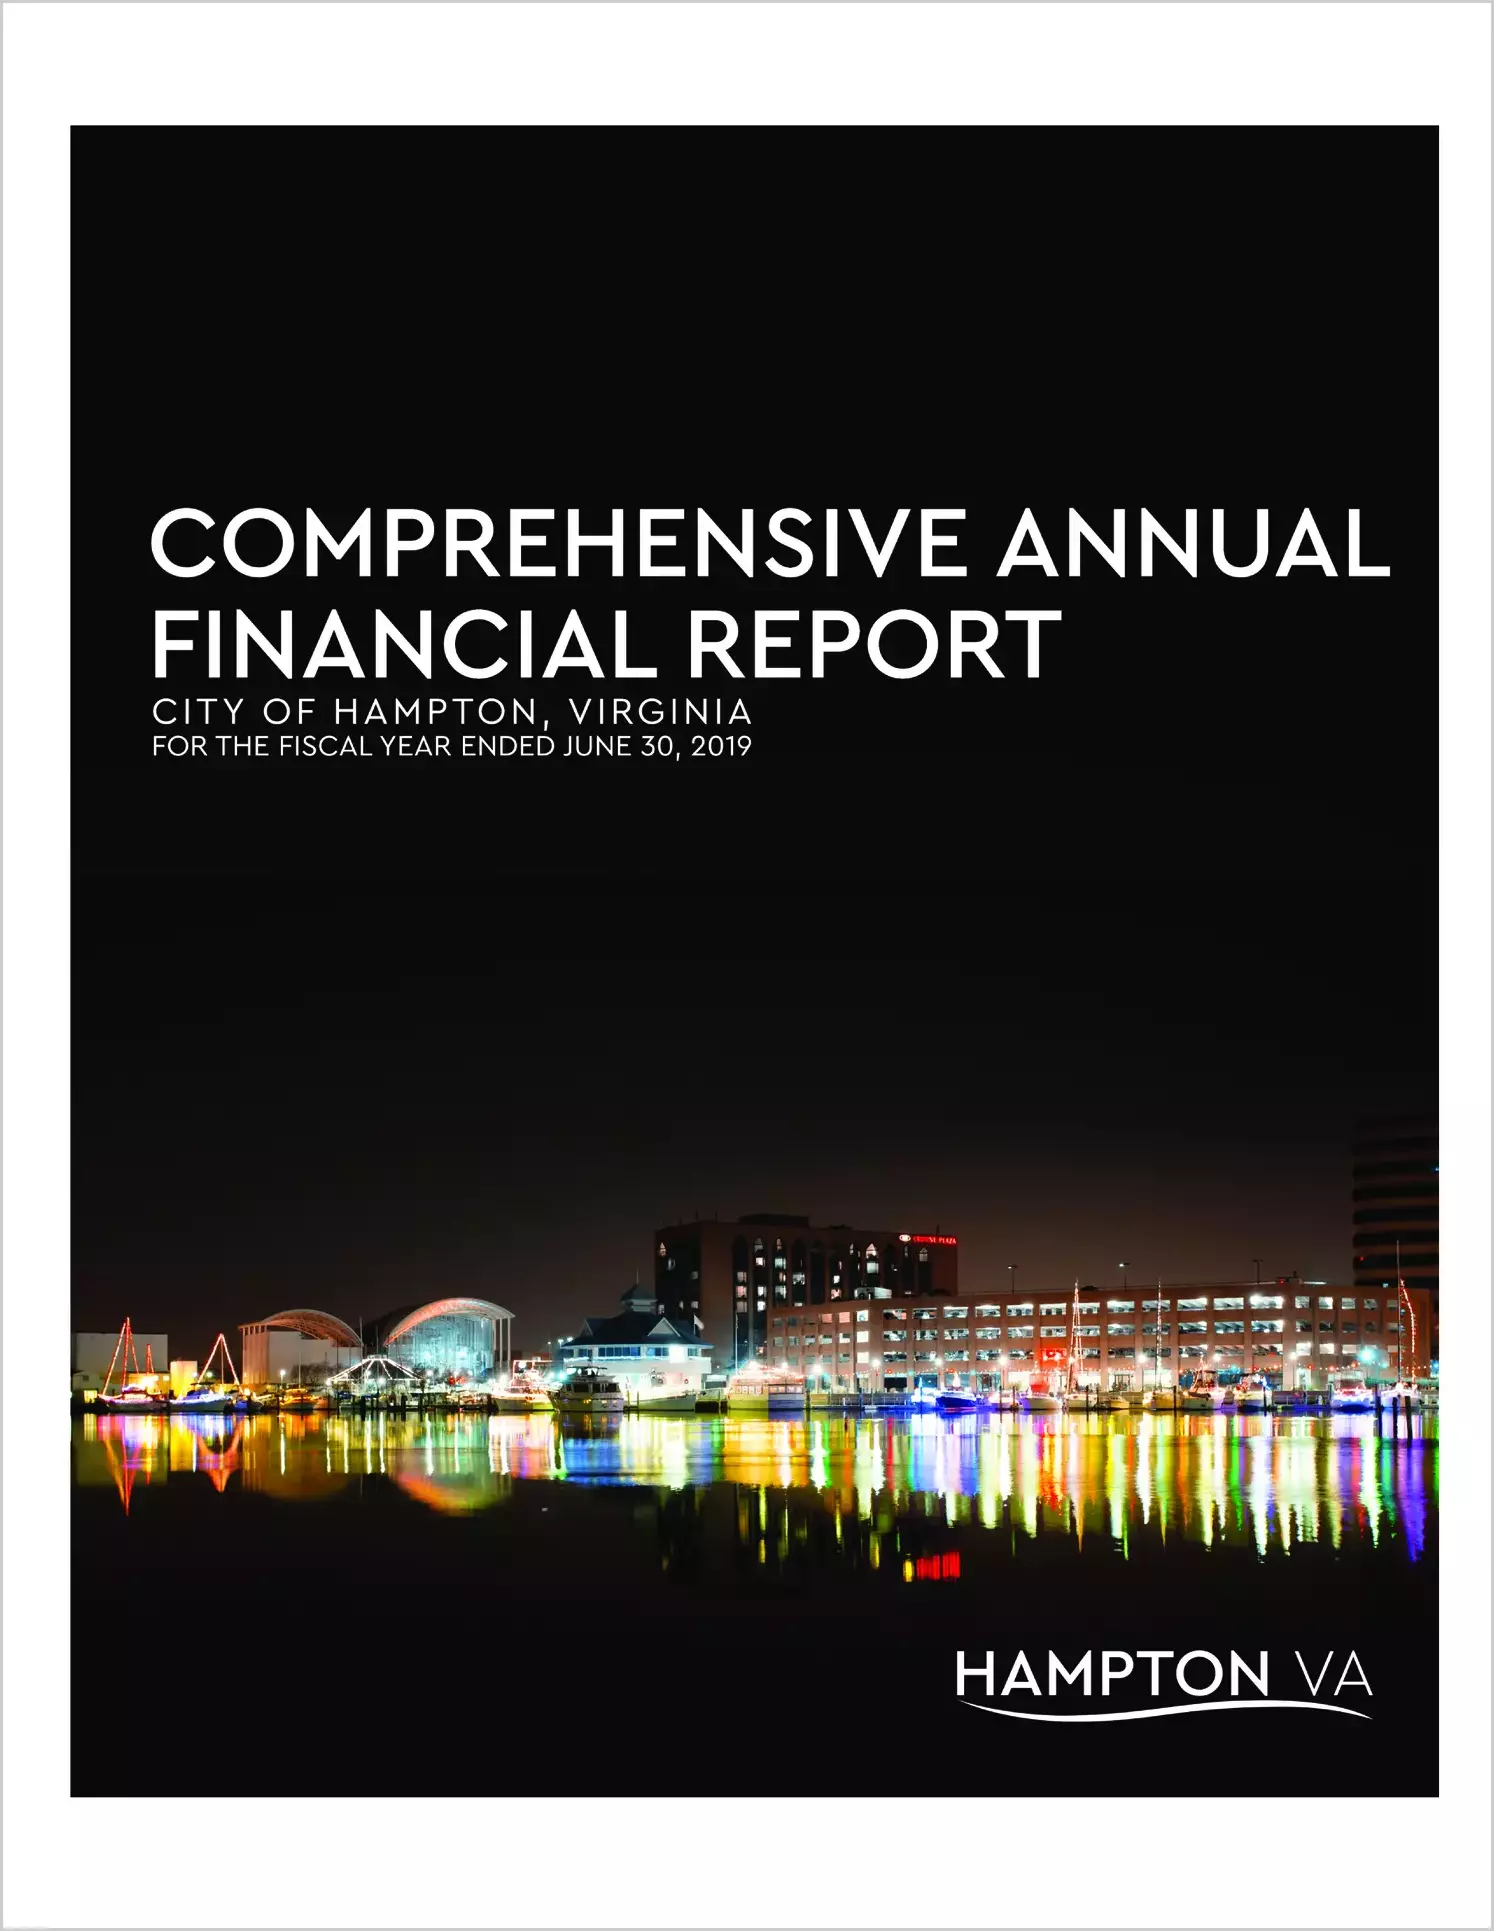 2019 Annual Financial Report for City of Hampton